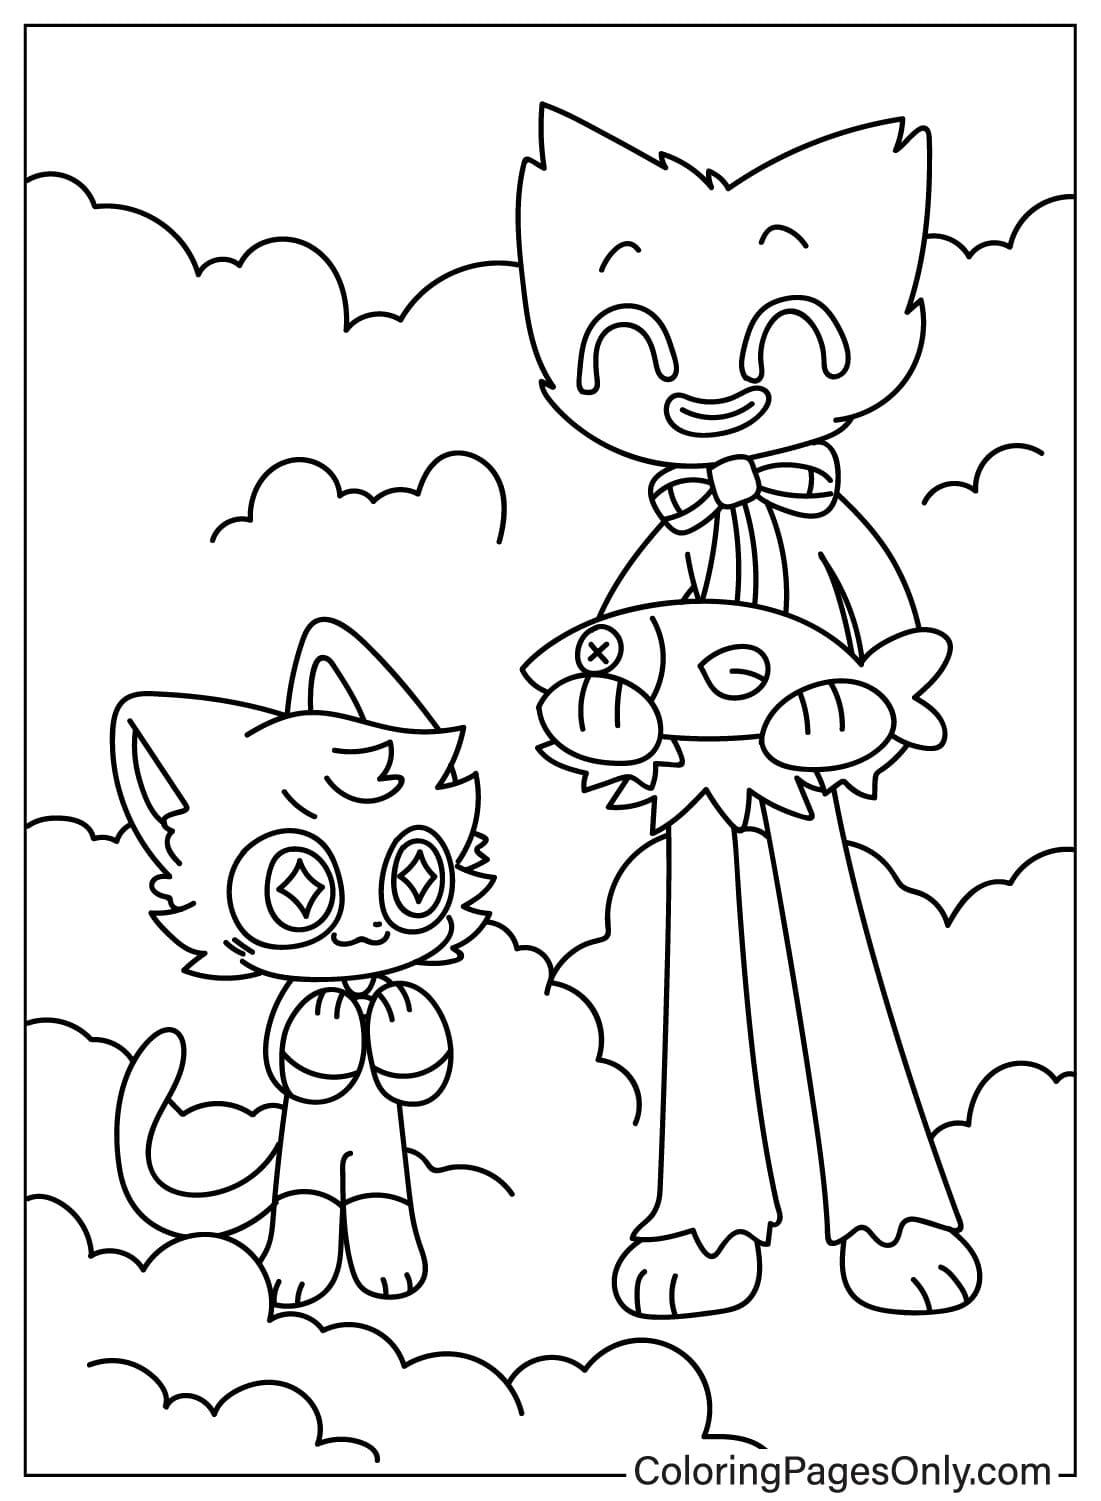 CatNap and Huggy Wuggy Coloring Page from CatNap